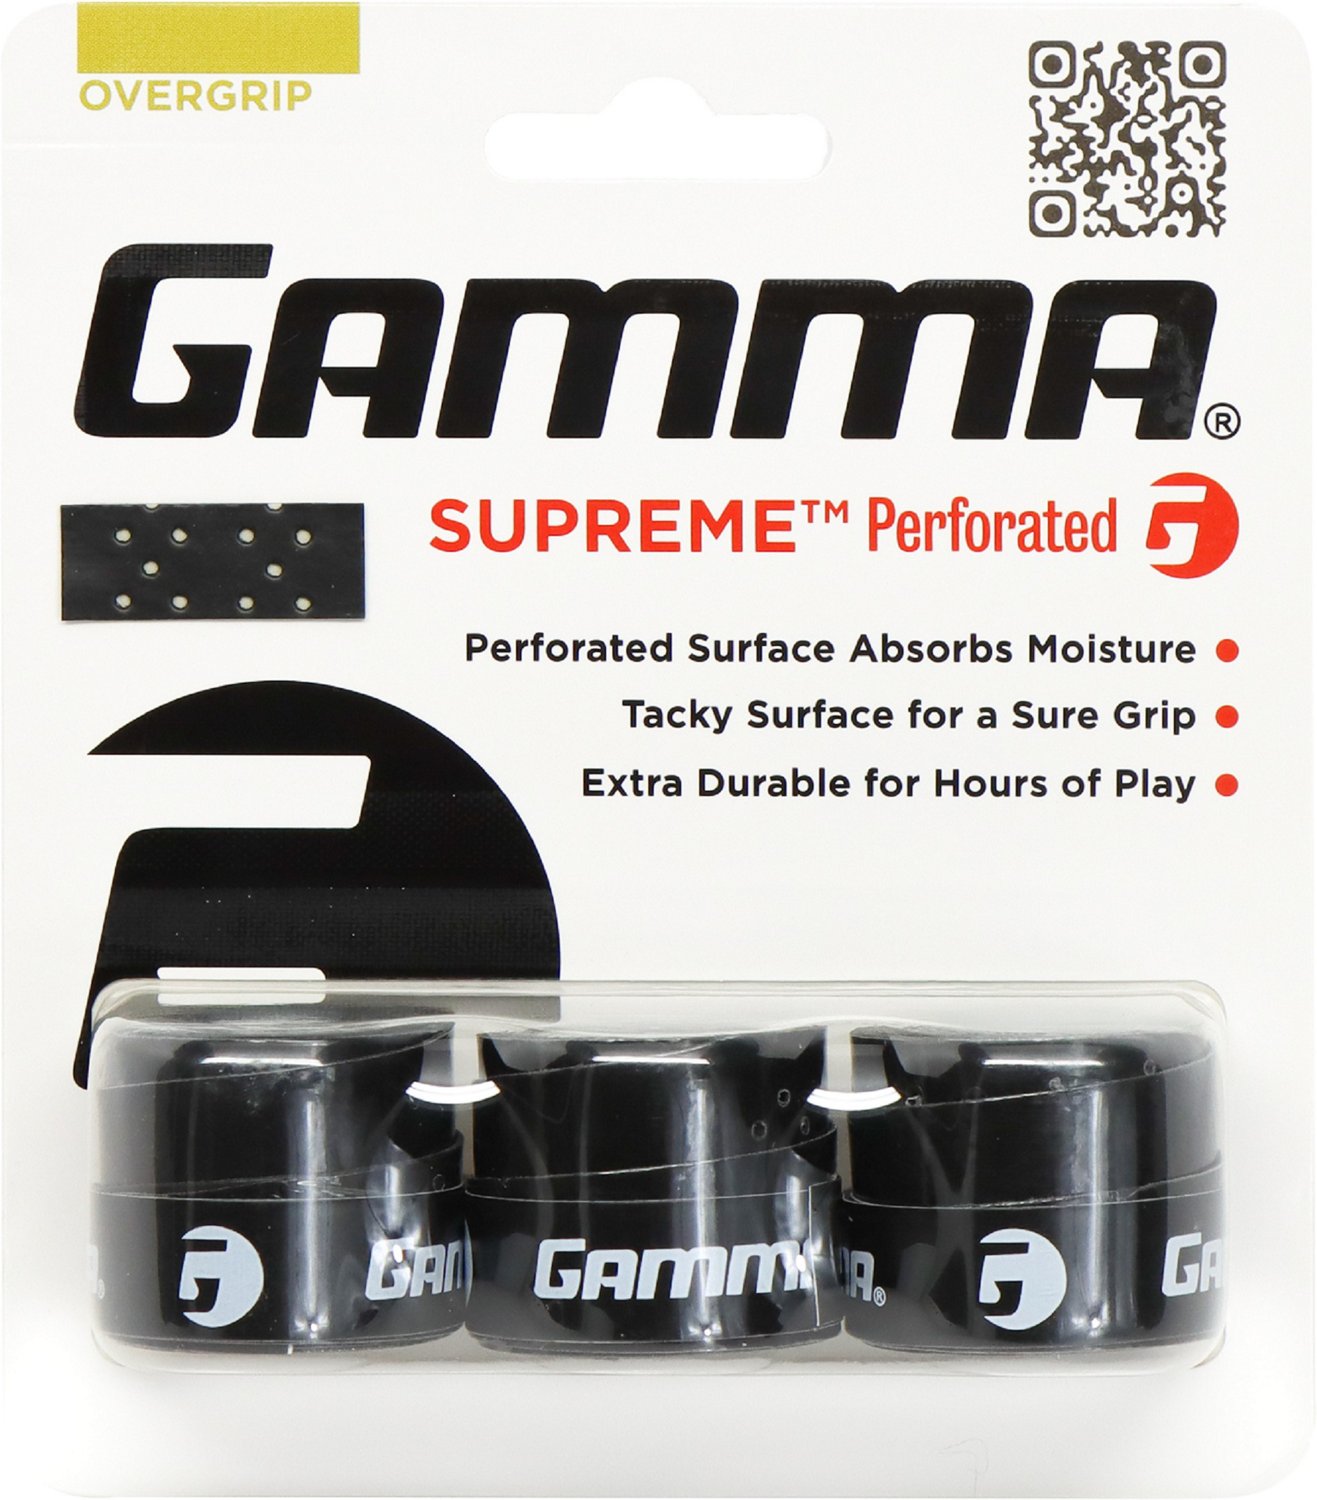 Academy Sports + Outdoors Gamma Synthetic Gut 16 Gauge Tennis String Reel